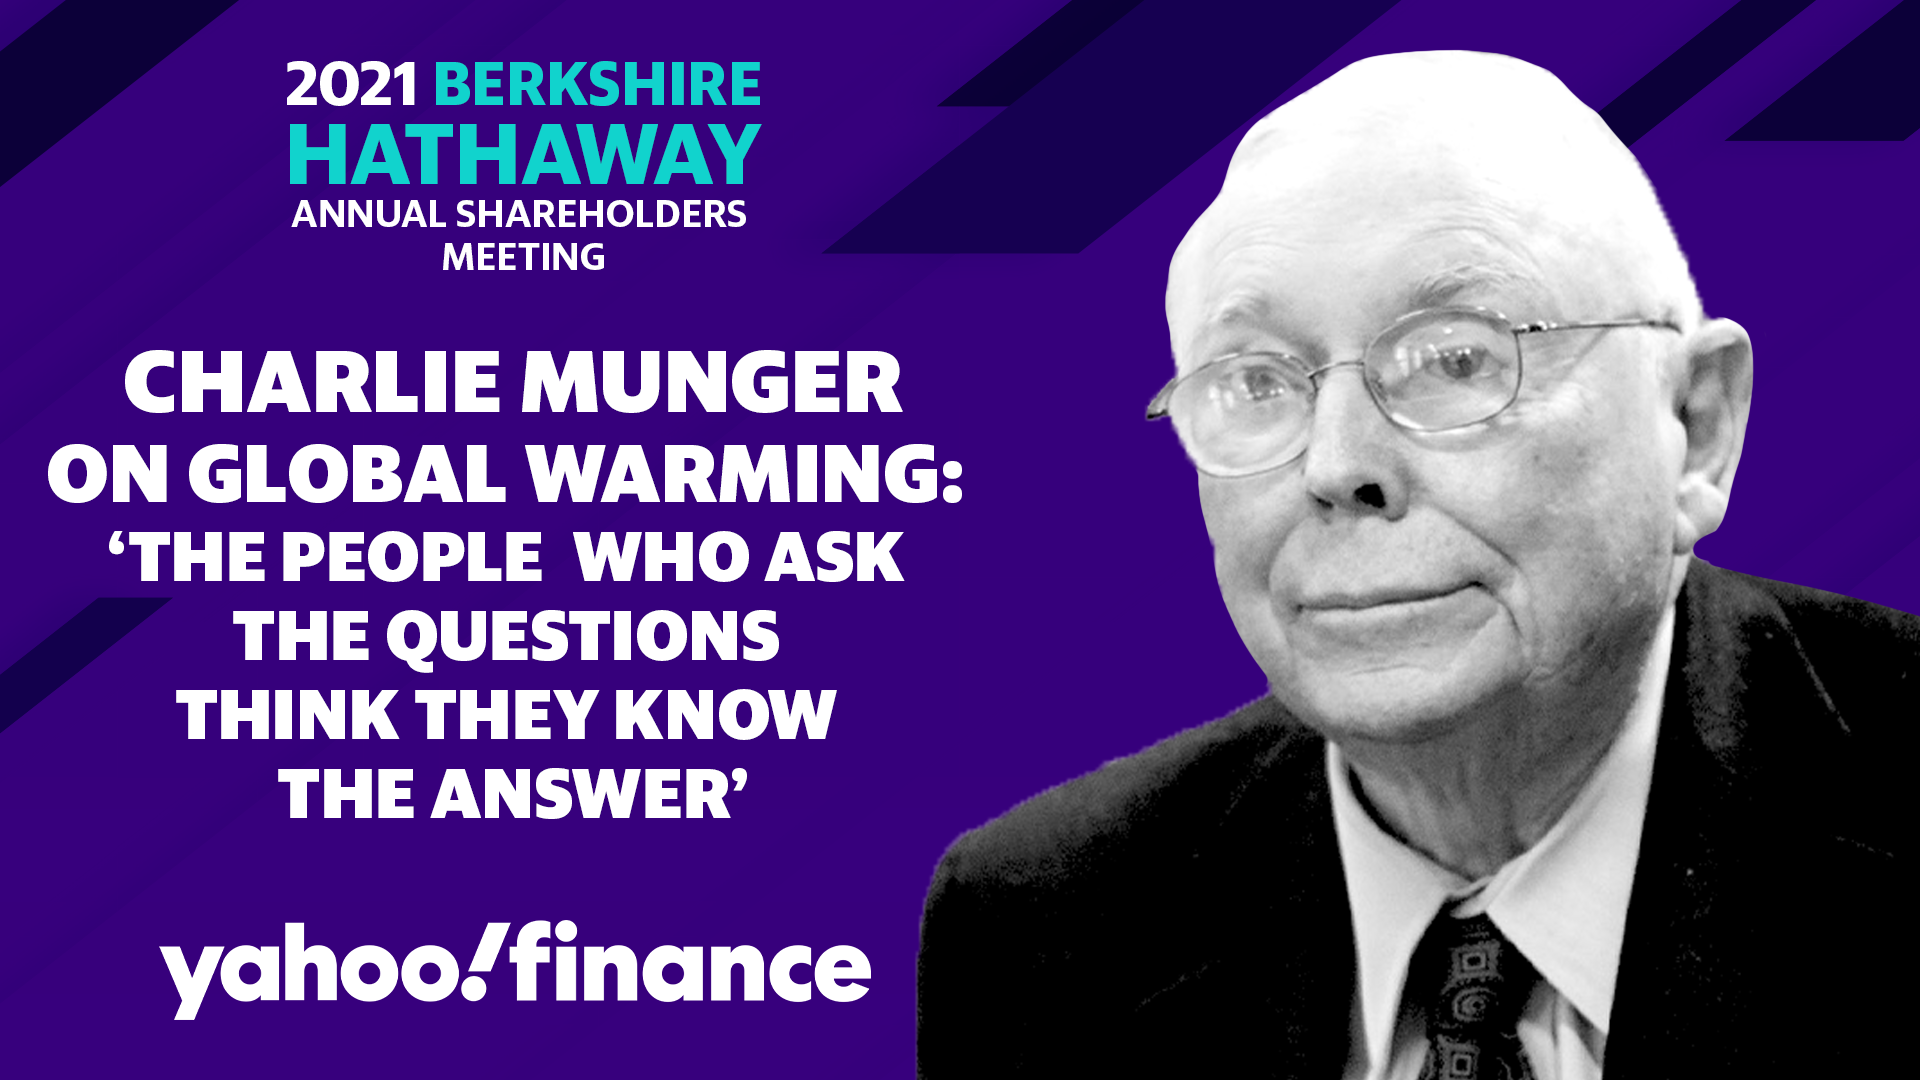 Charlie Munger on global warming: ‘The people who ask the questions think they know the answer’ - Yahoo Finance